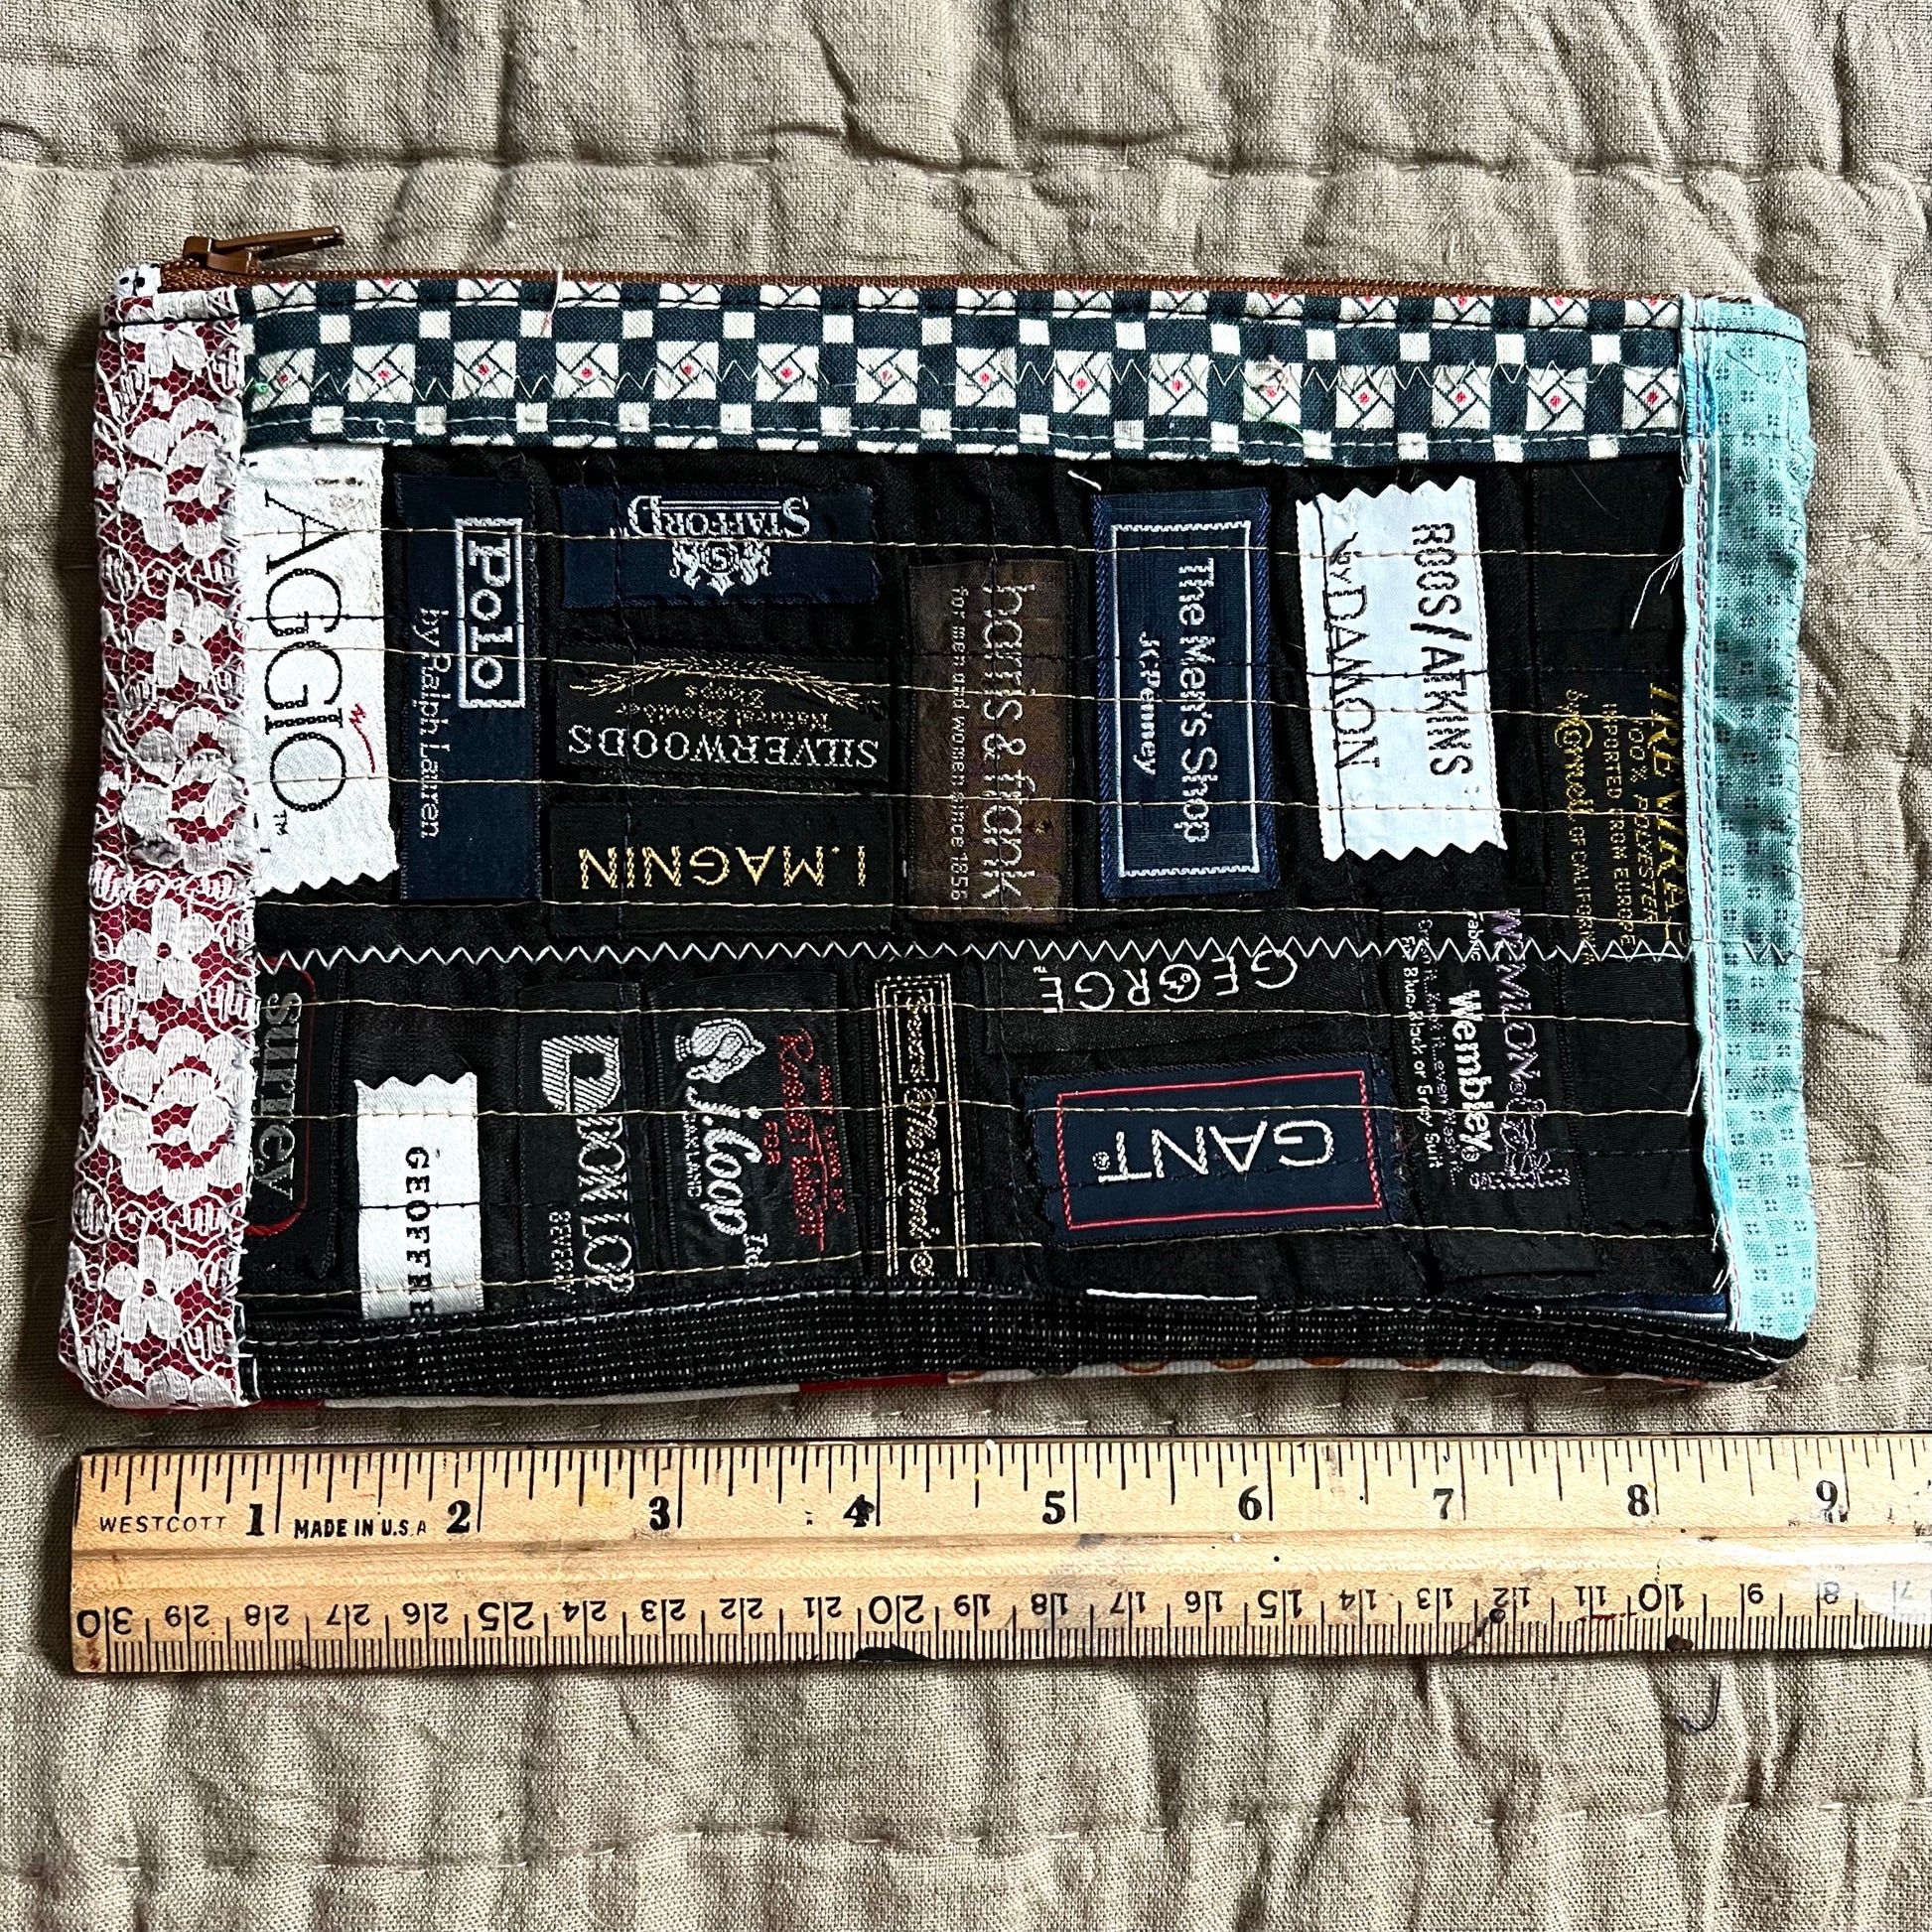 Front view of necktie label zipper pouch, with a ruler underneath which indicates 9 inches